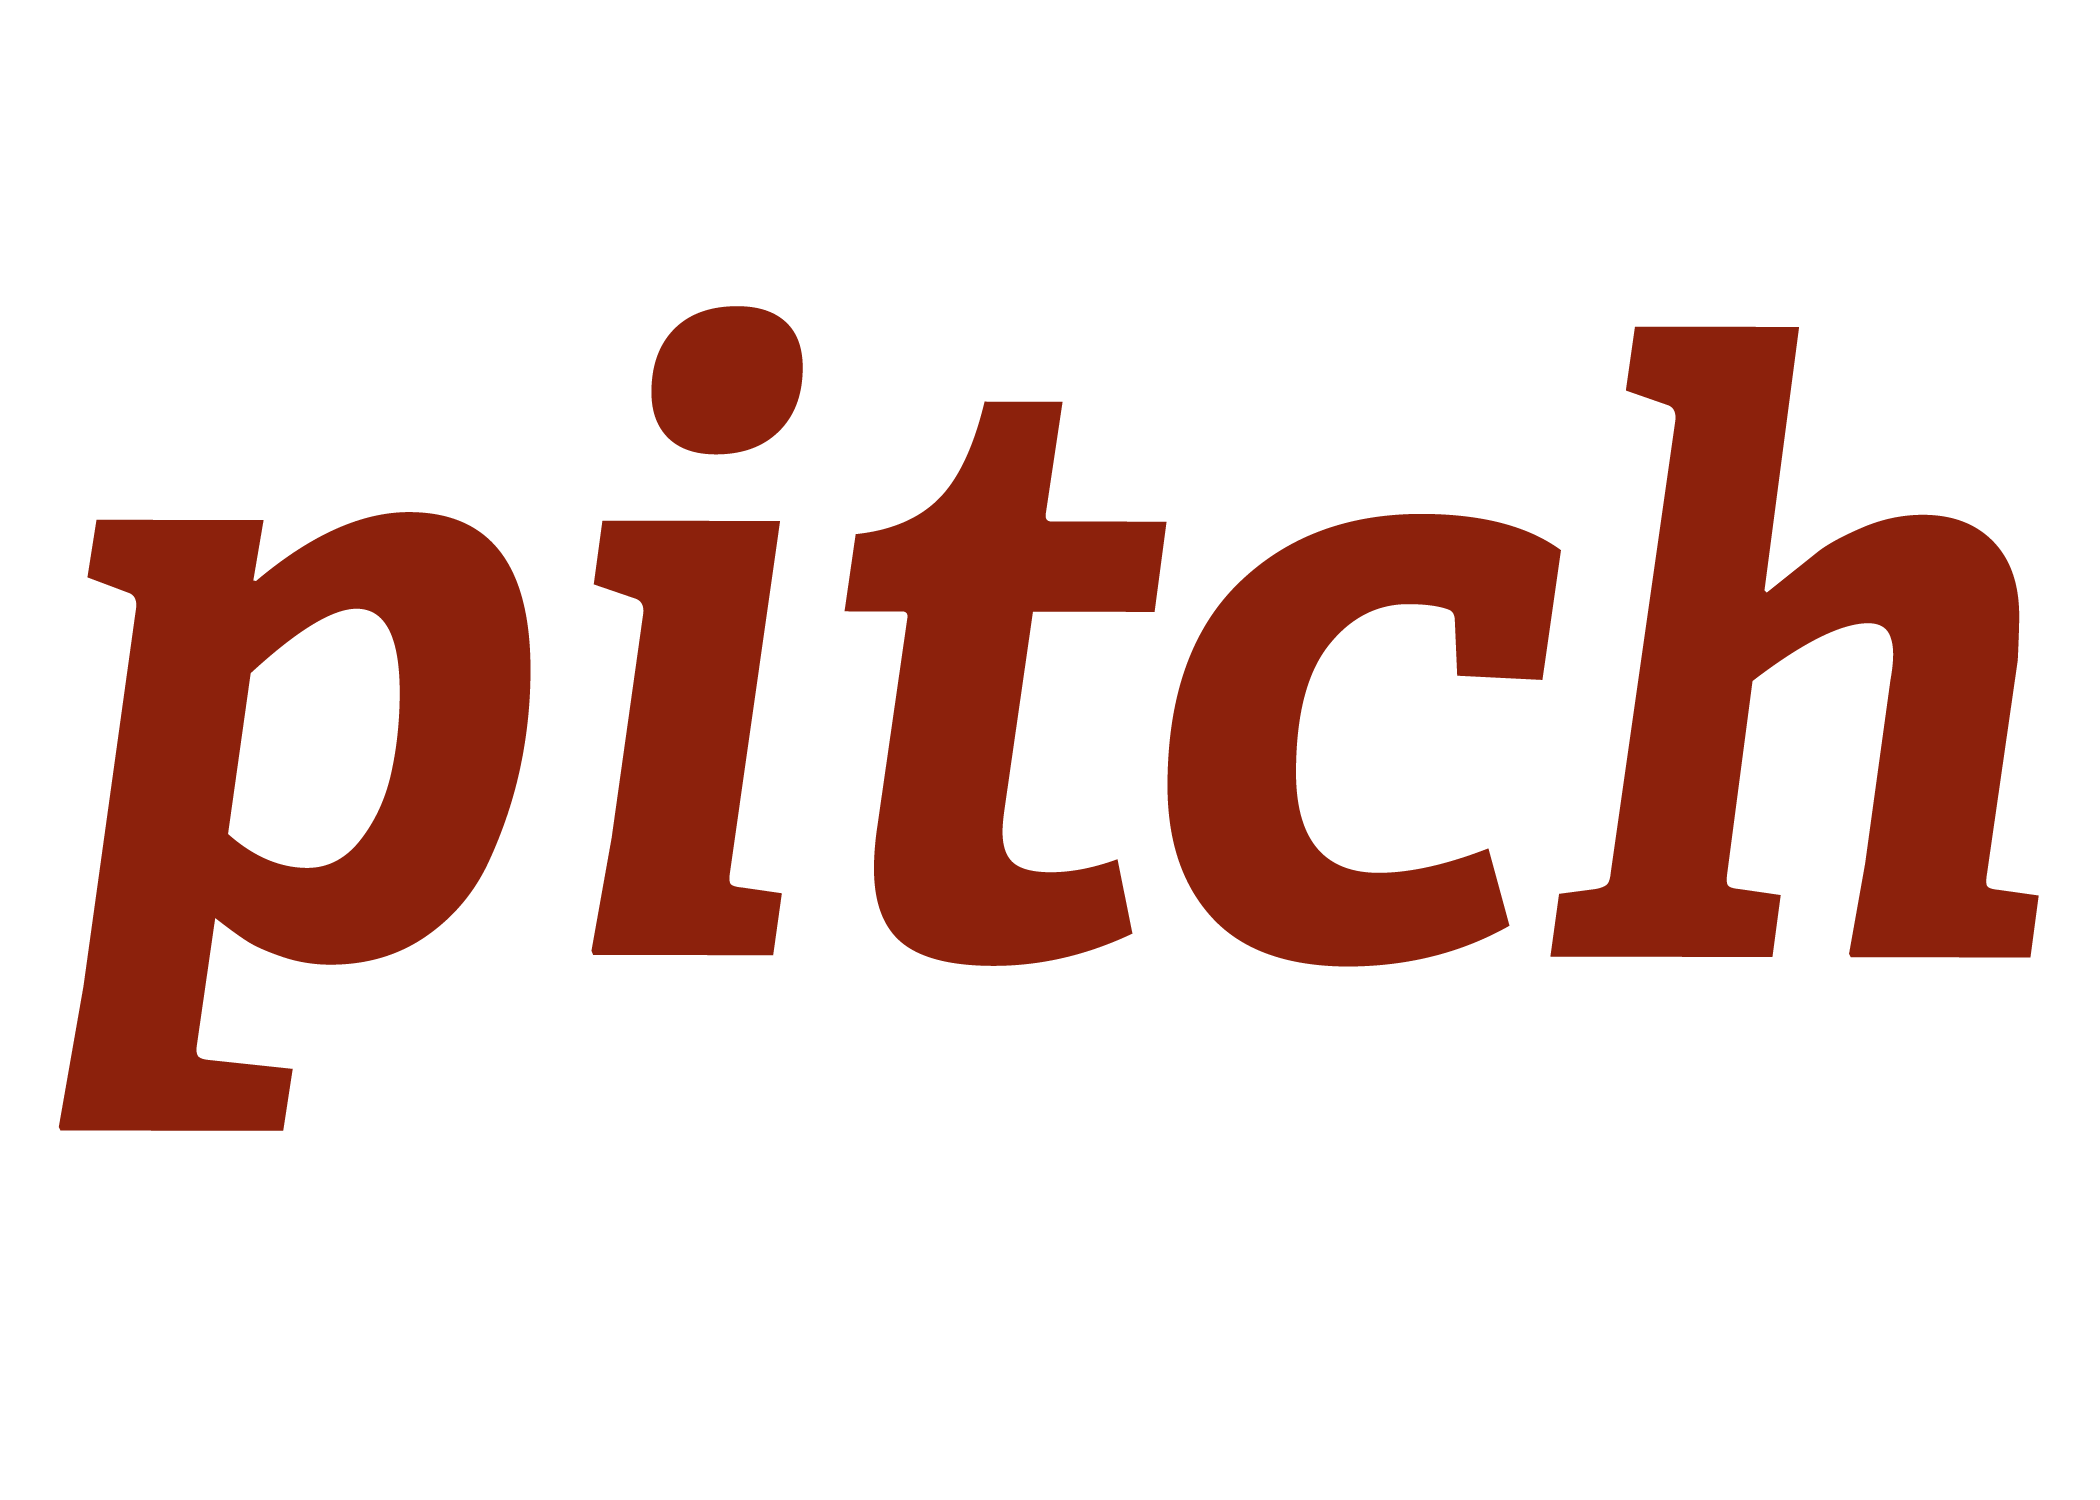 Pitch: A Journal of Arts & Literature